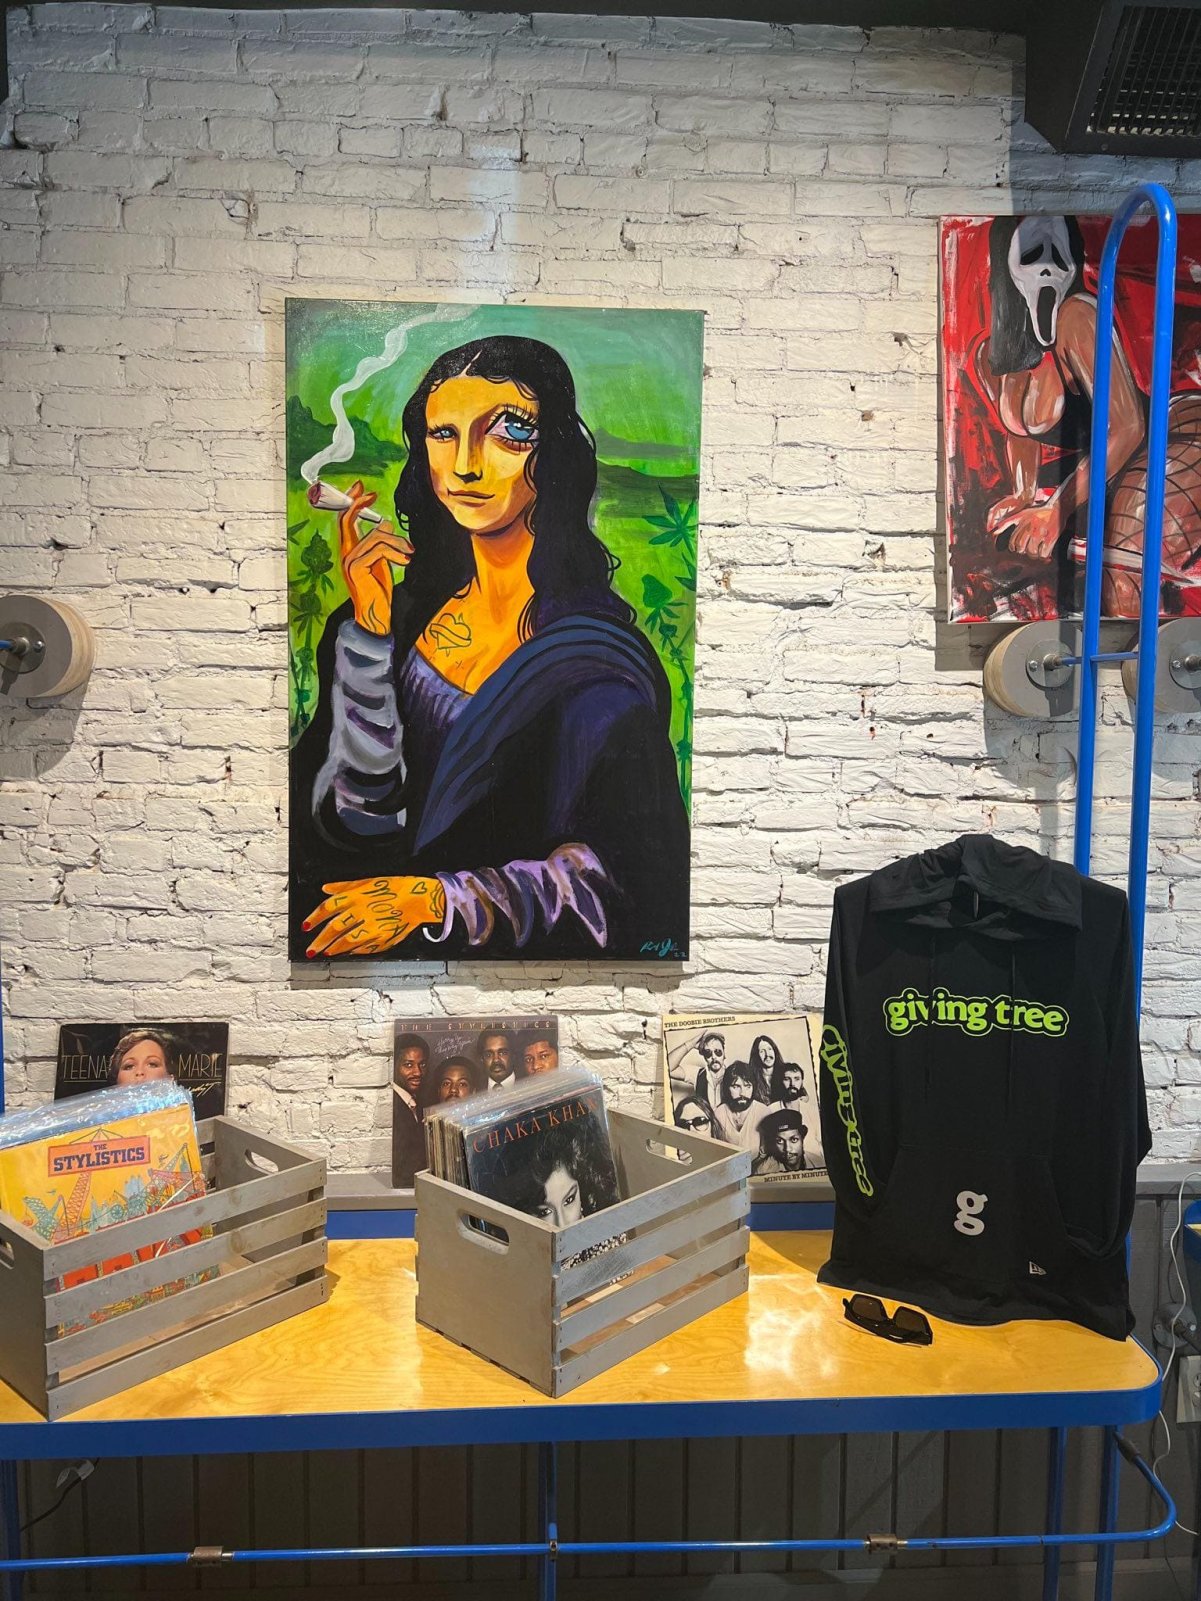 Giving-Tree-DC-art-gallery-and-weed-shop.jpeg